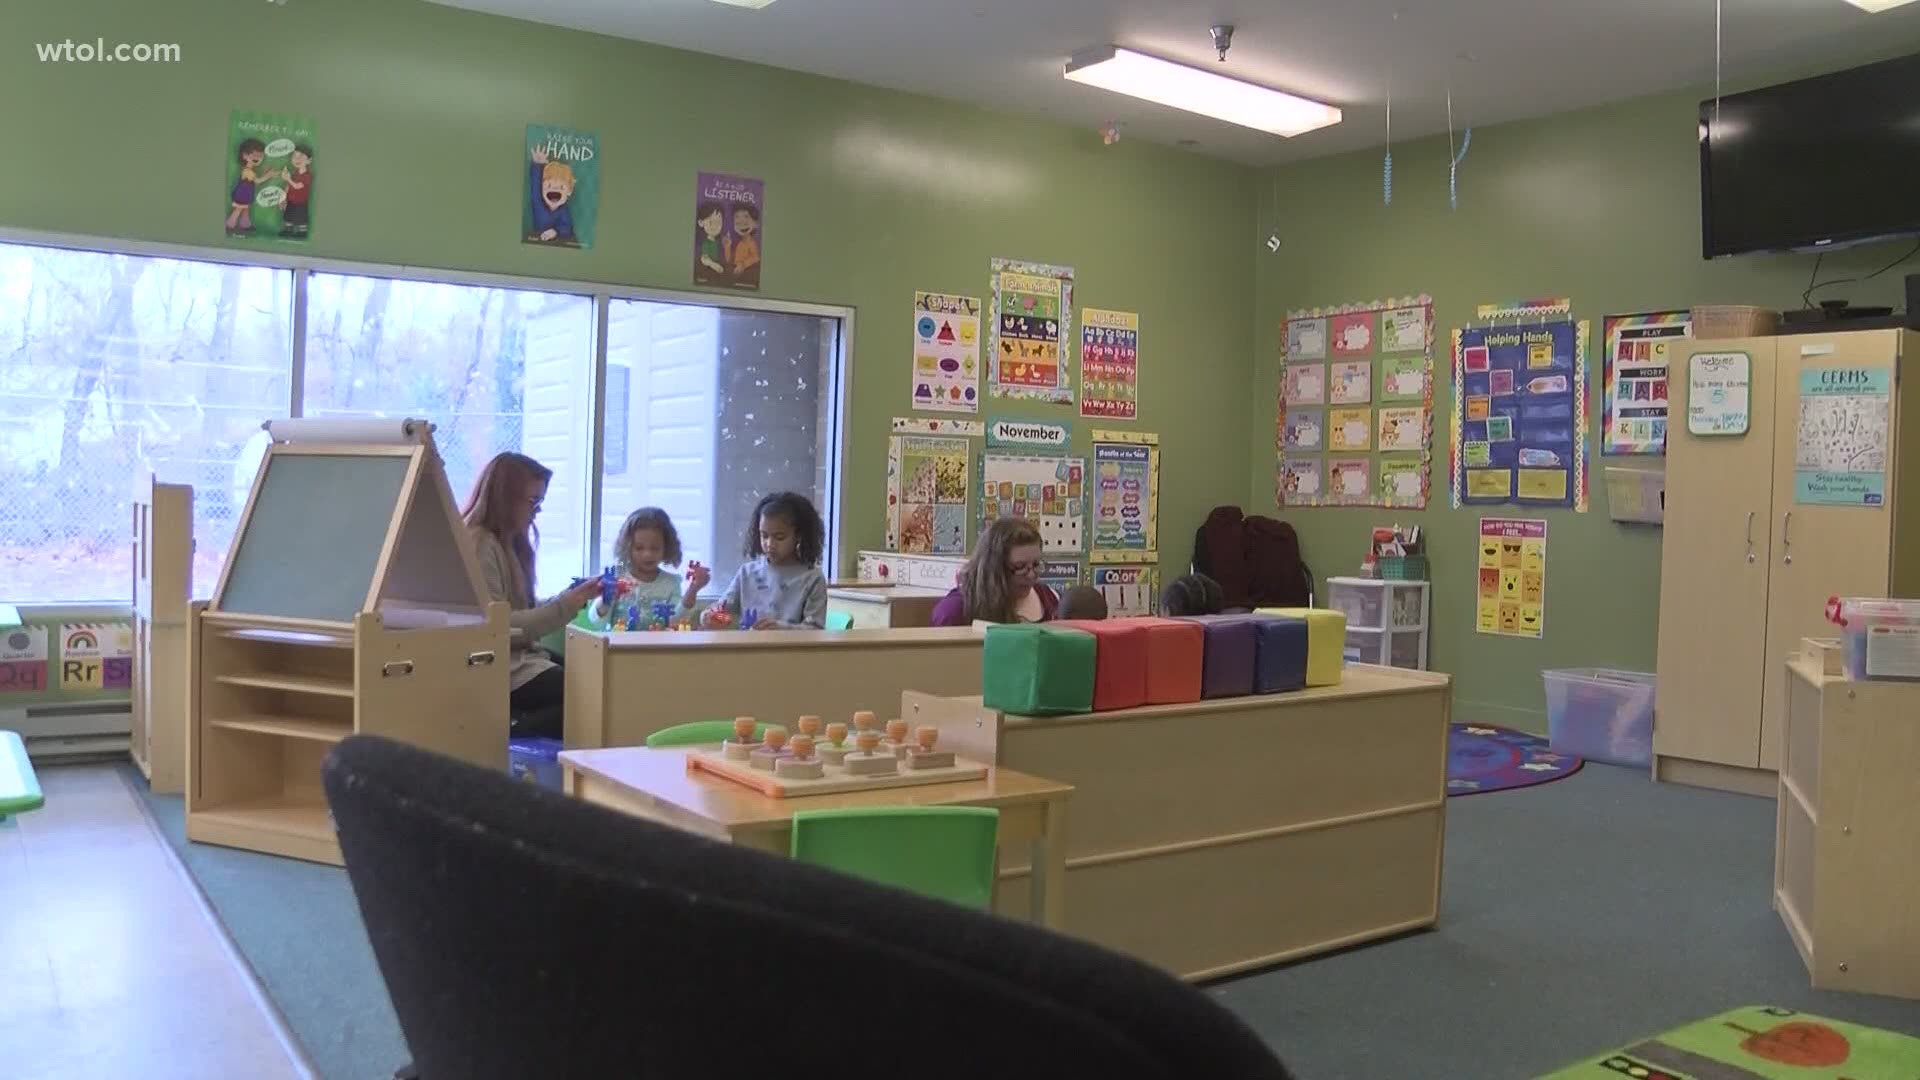 On Tuesday, Gov. Mike DeWine announced childcare facilities could return in full on August 9, vowing to keep a close eye on COVID-19 cases in the event of an uptick.